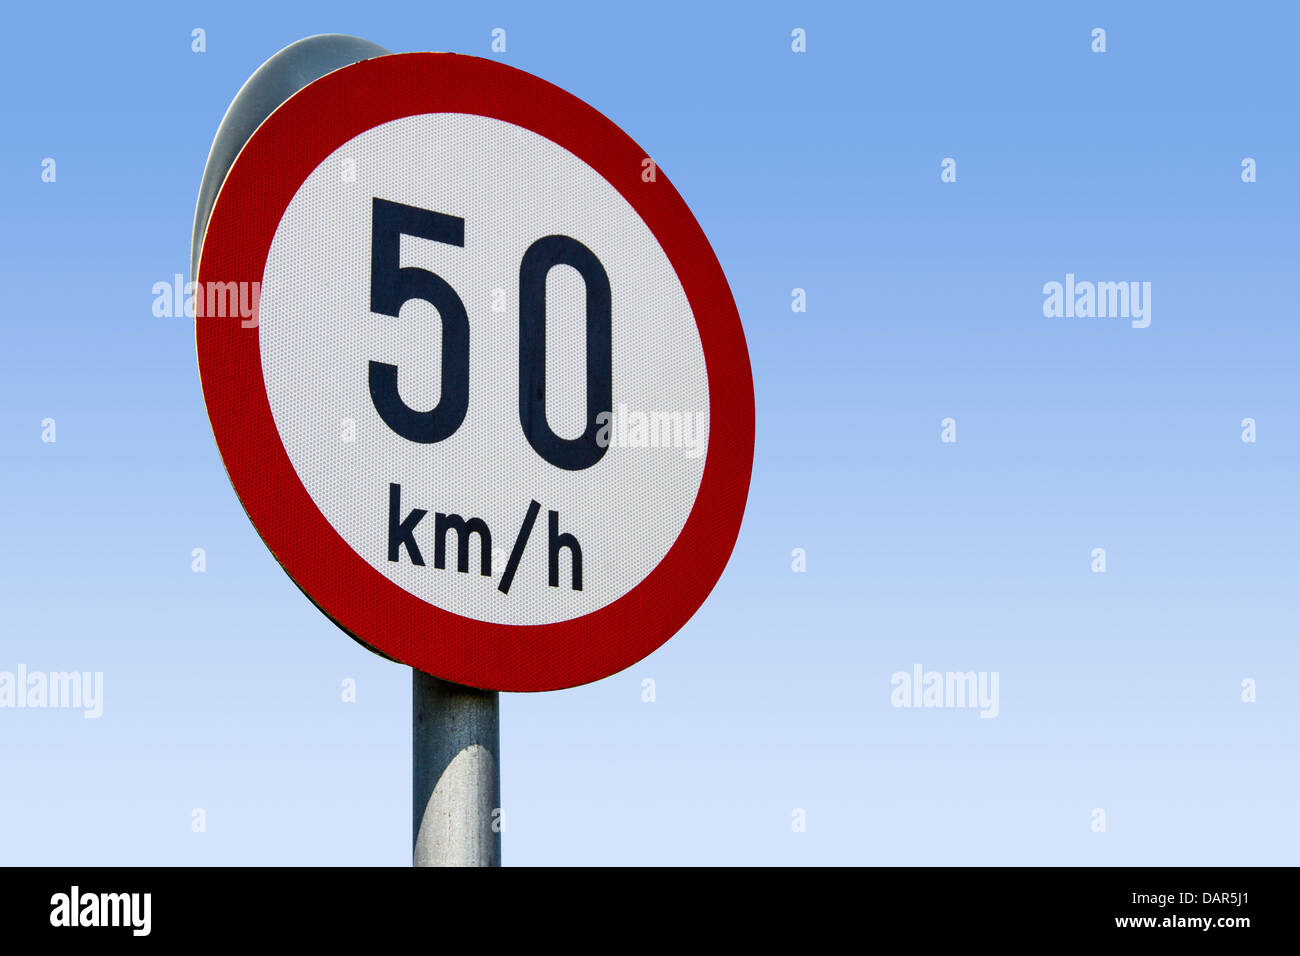 50km speed limit road sign on blue sky - watch your speed. European Road sign. Stock Photo